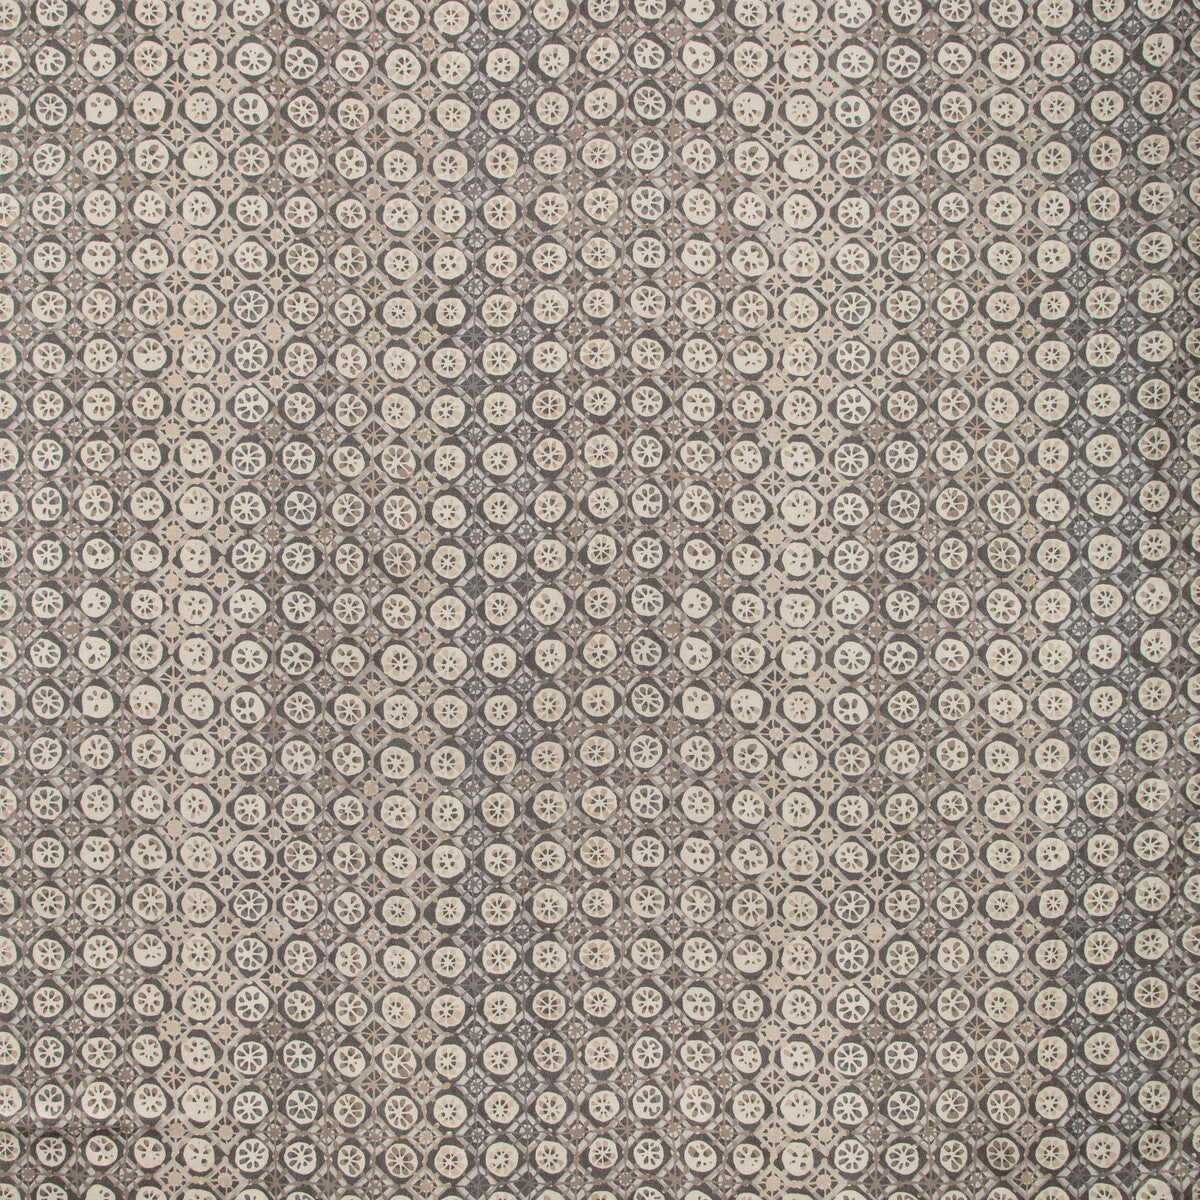 Procida fabric in pewter color - pattern PROCIDA.21.0 - by Kravet Couture in the Modern Colors-Sojourn Collection collection